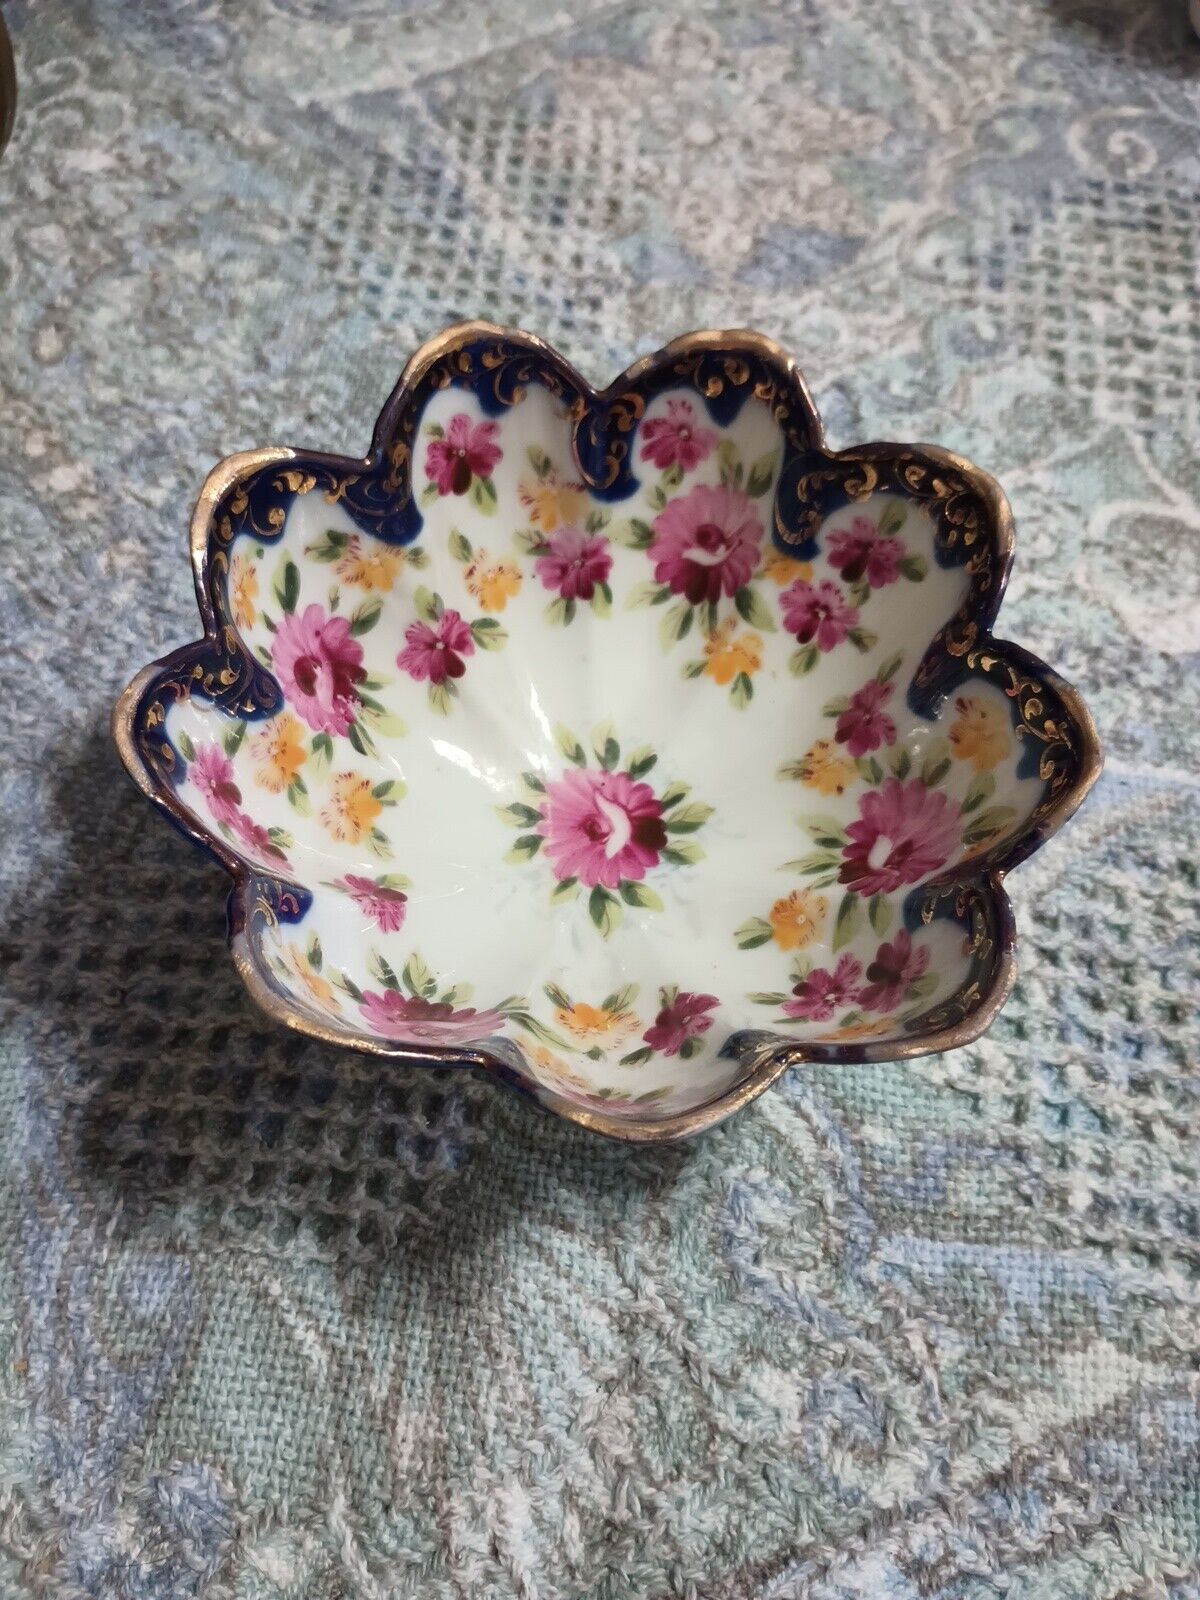 Vintage Likely Nippon Flow Blue Bowl with Pink Rose Decorations w/ Gold Trim